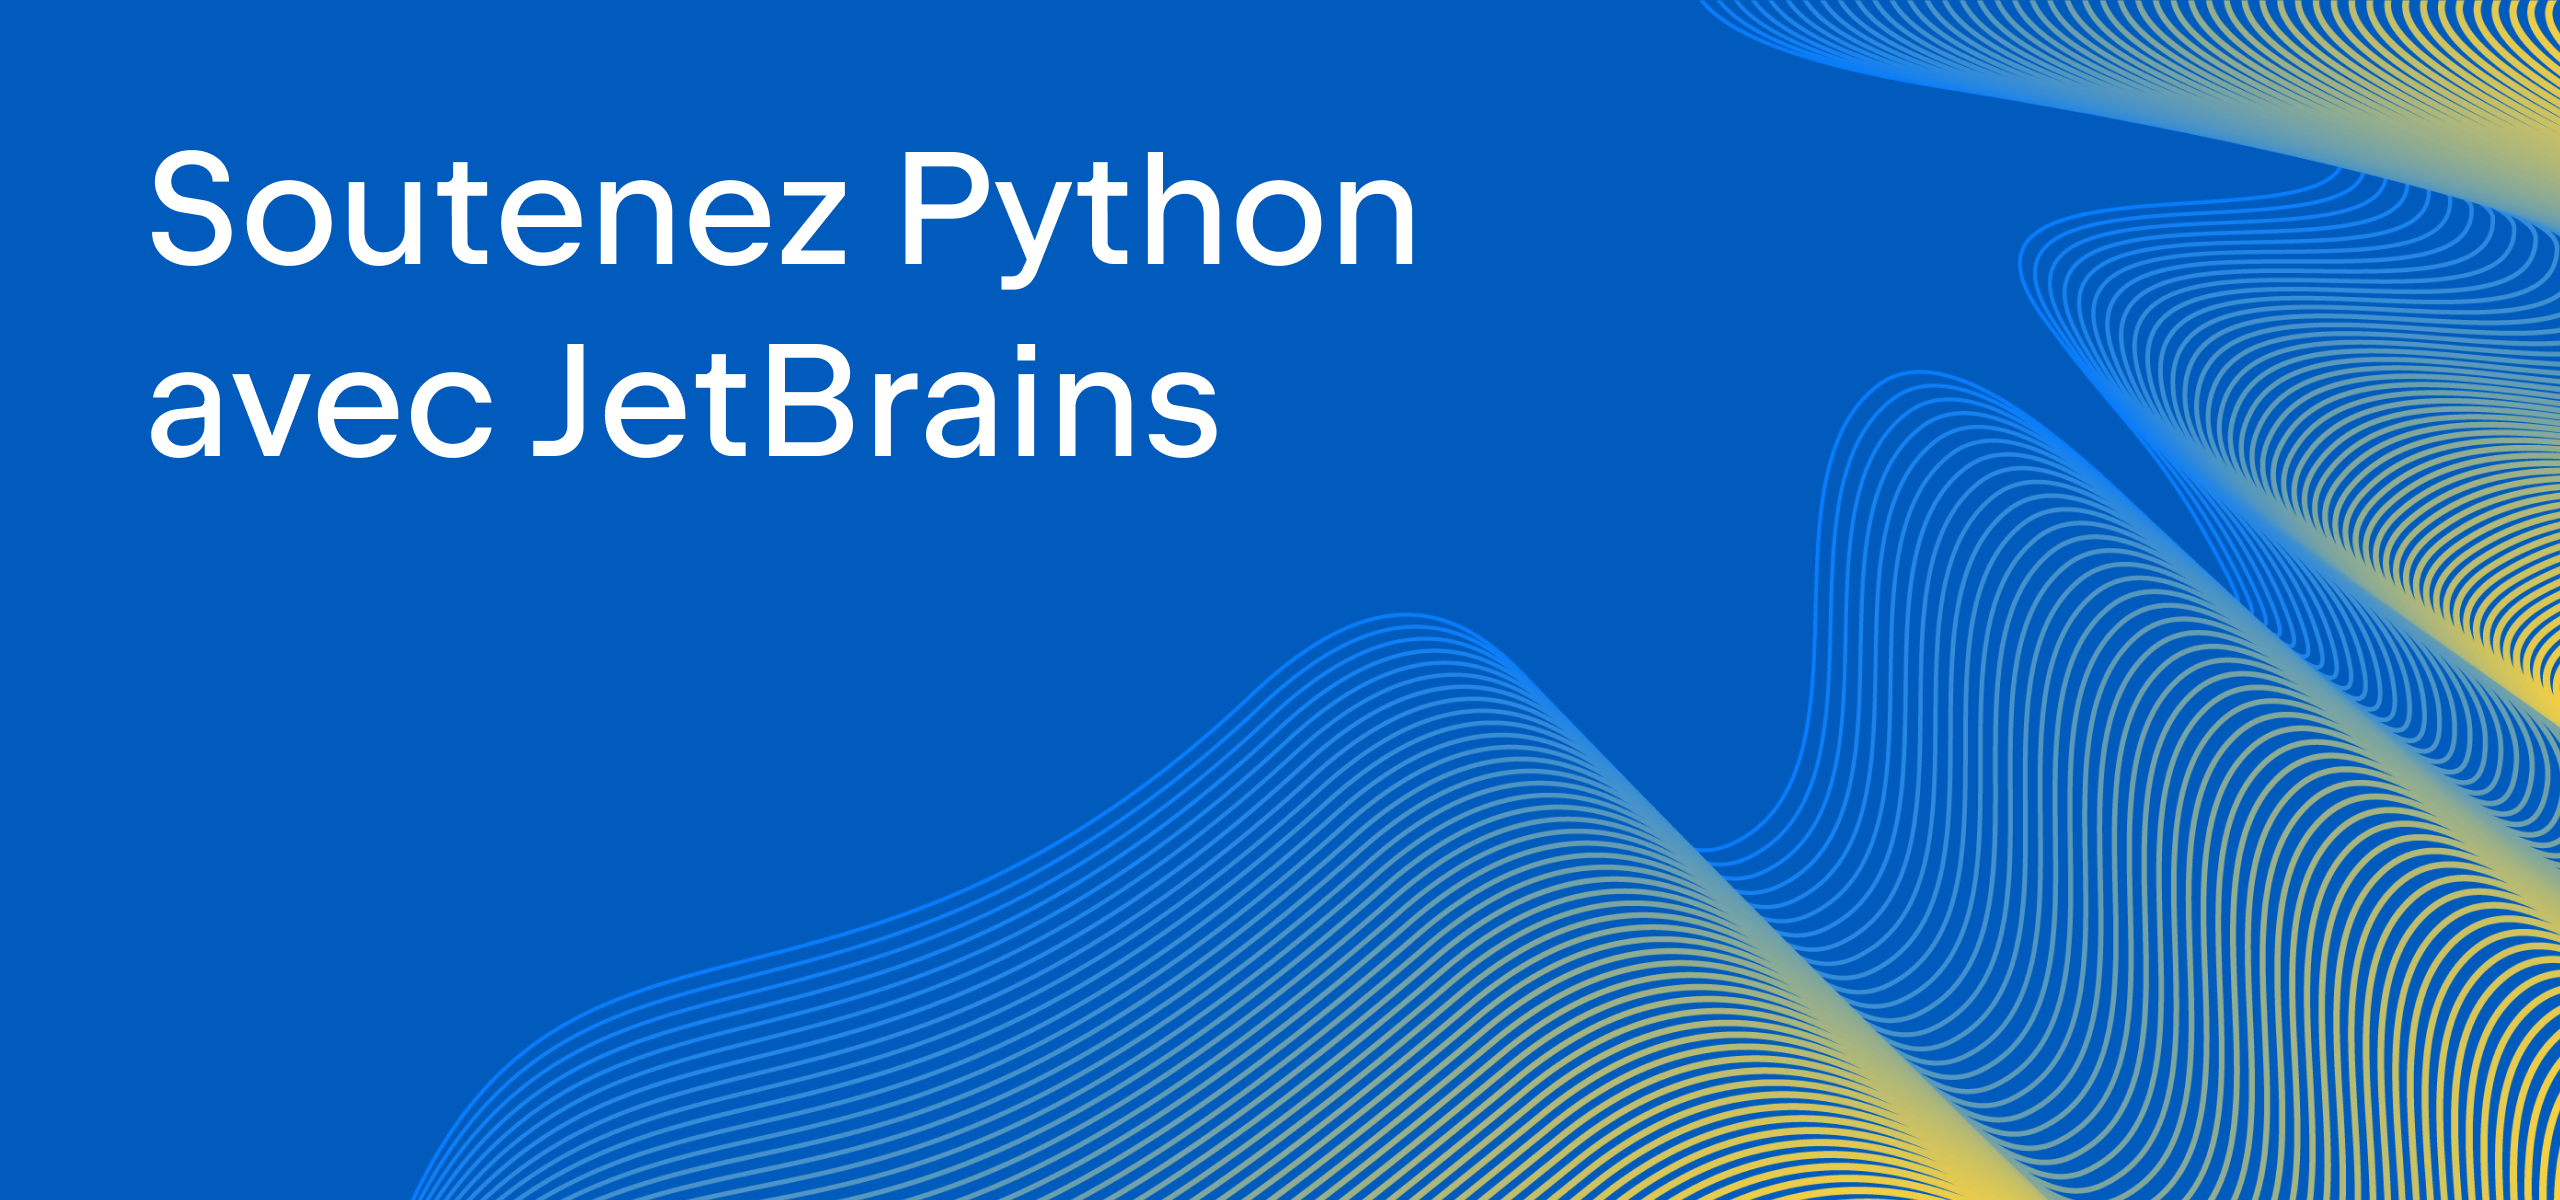 Nom : pythonjetbrains.png
Affichages : 52472
Taille : 1,21 Mo